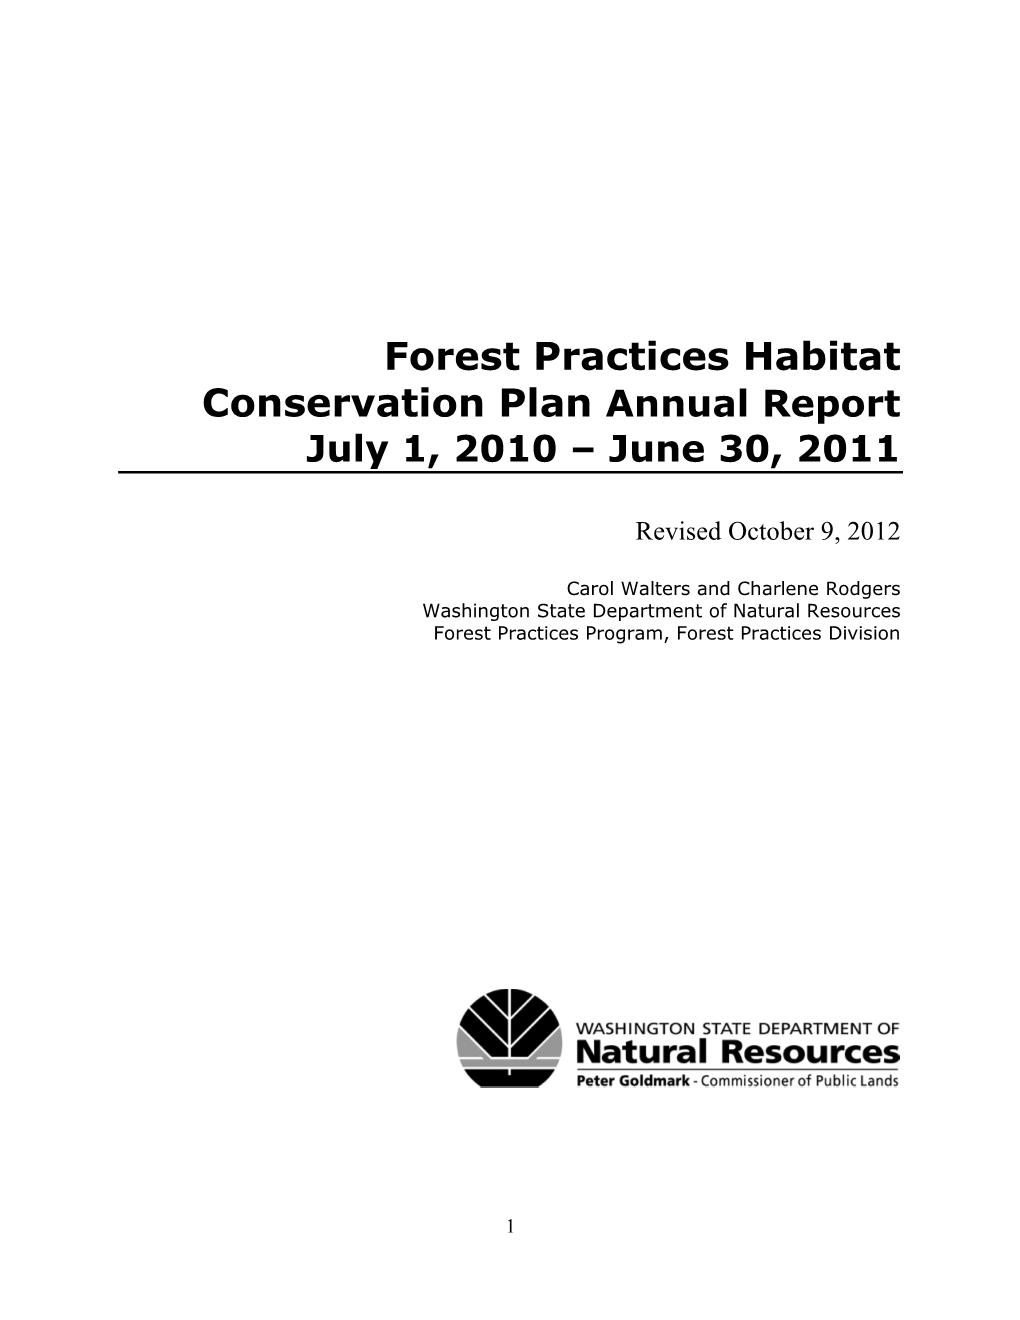 Forest Practices Habitat Conservation Plan Annual Report July 1, 2010 – June 30, 2011